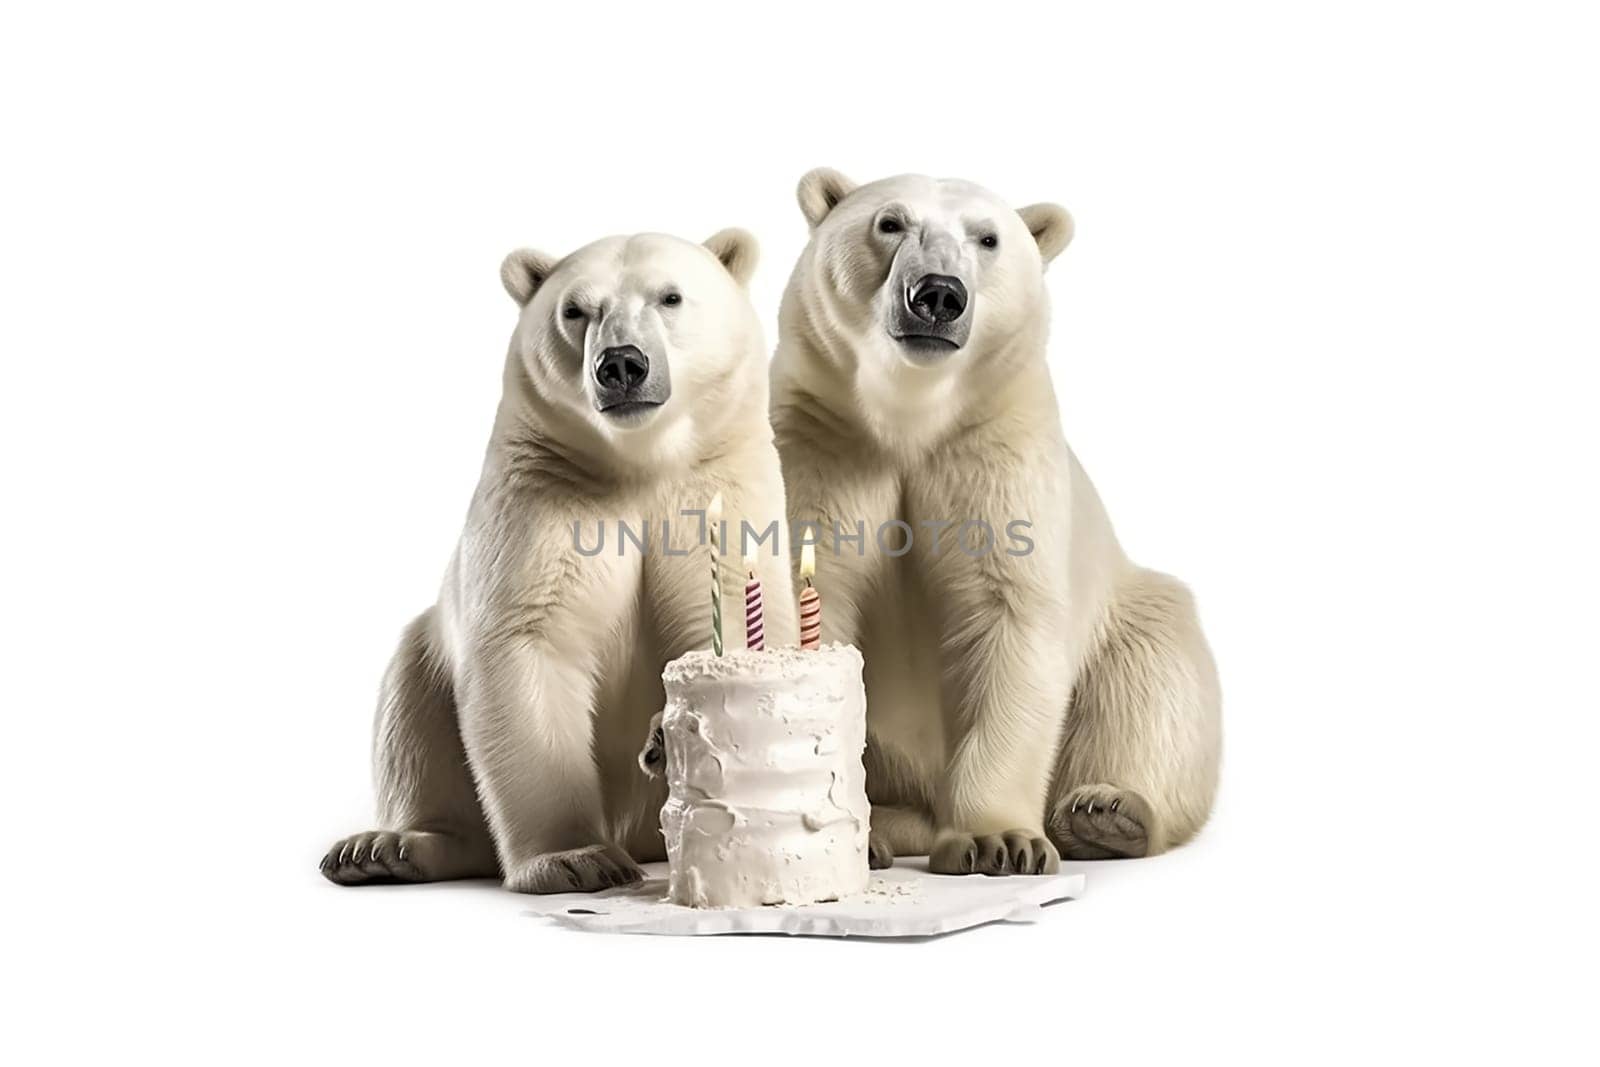 Two polar bears are celebrating a birthday or anniversary. A pair of white bears and a festive cake.